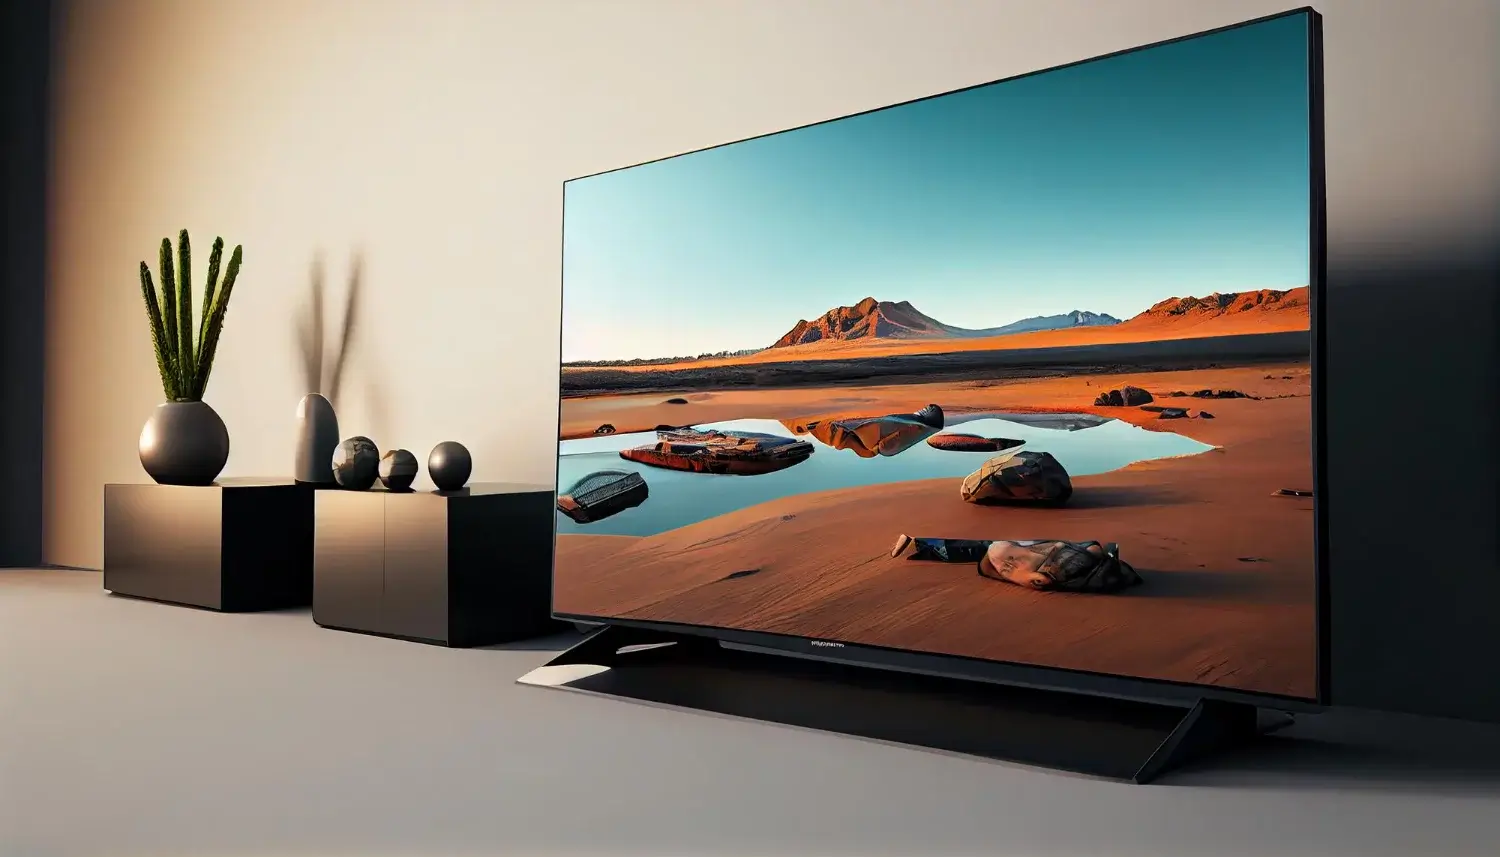 Old vs New Televisions: Weighing the Pros and Cons